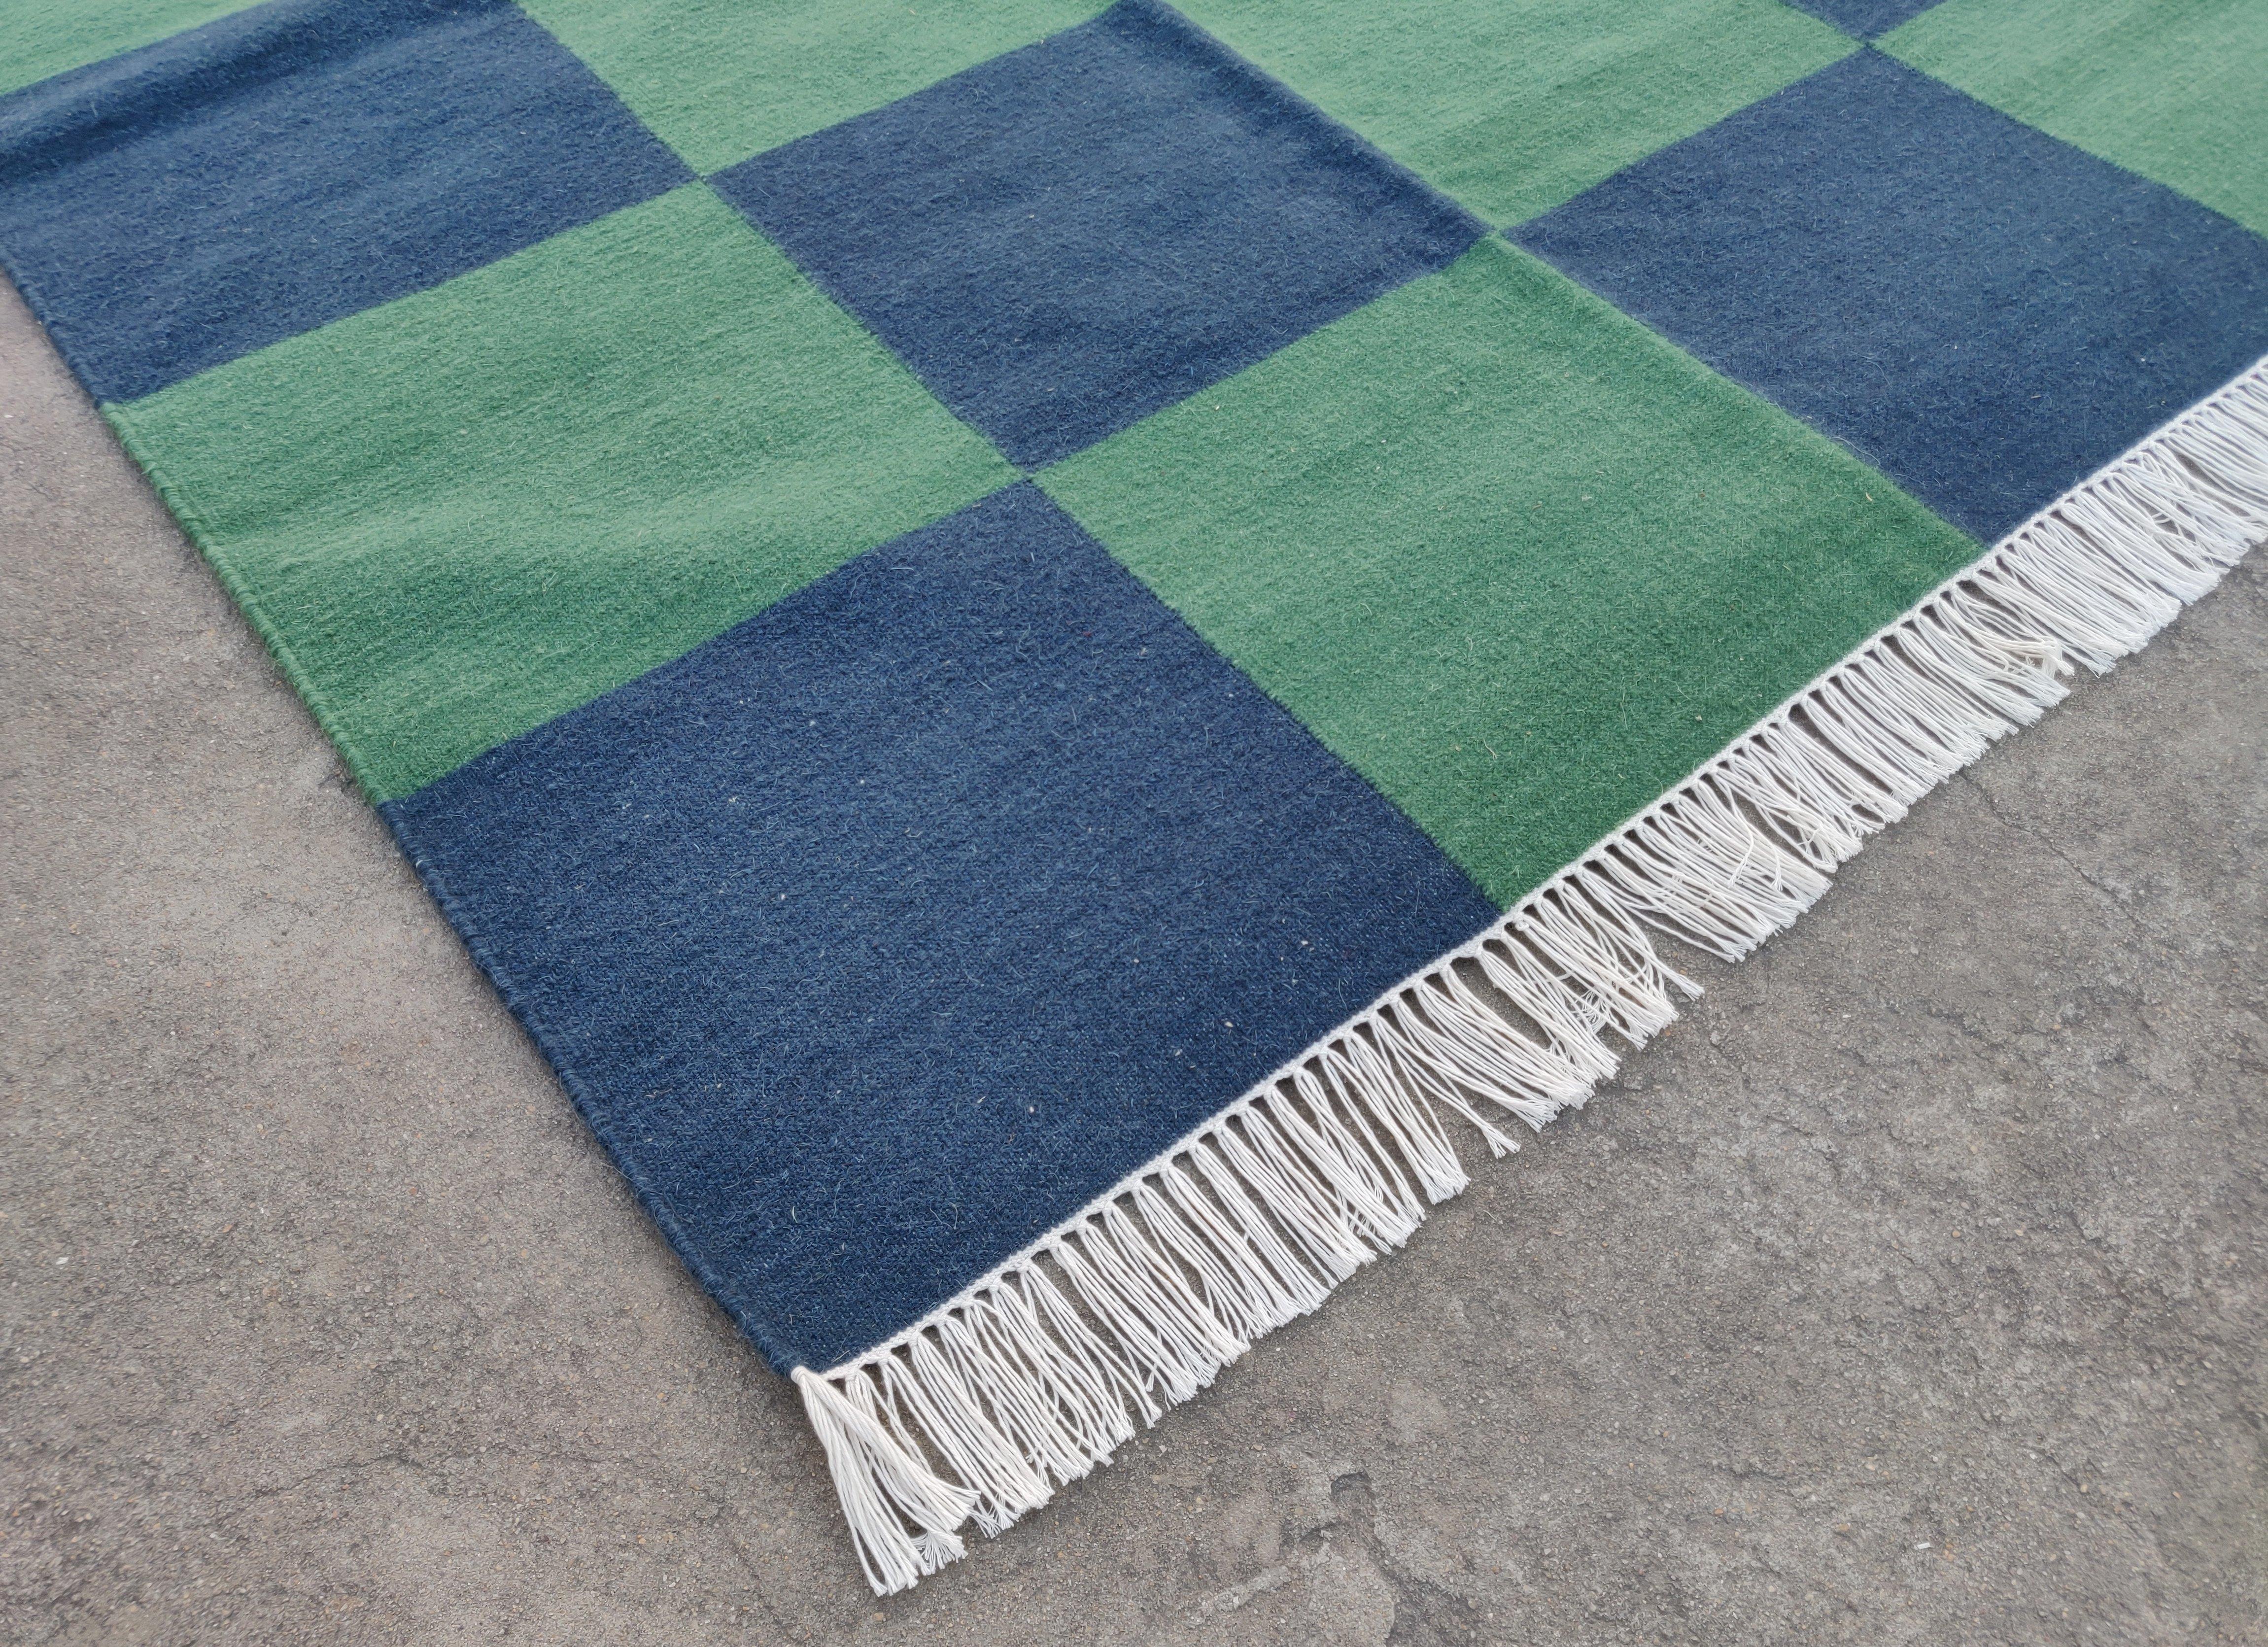 Handmade Woolen Area Flat Weave Rug, 6x9 Blue And Green Tile Checked Dhurrie Rug In New Condition For Sale In Jaipur, IN